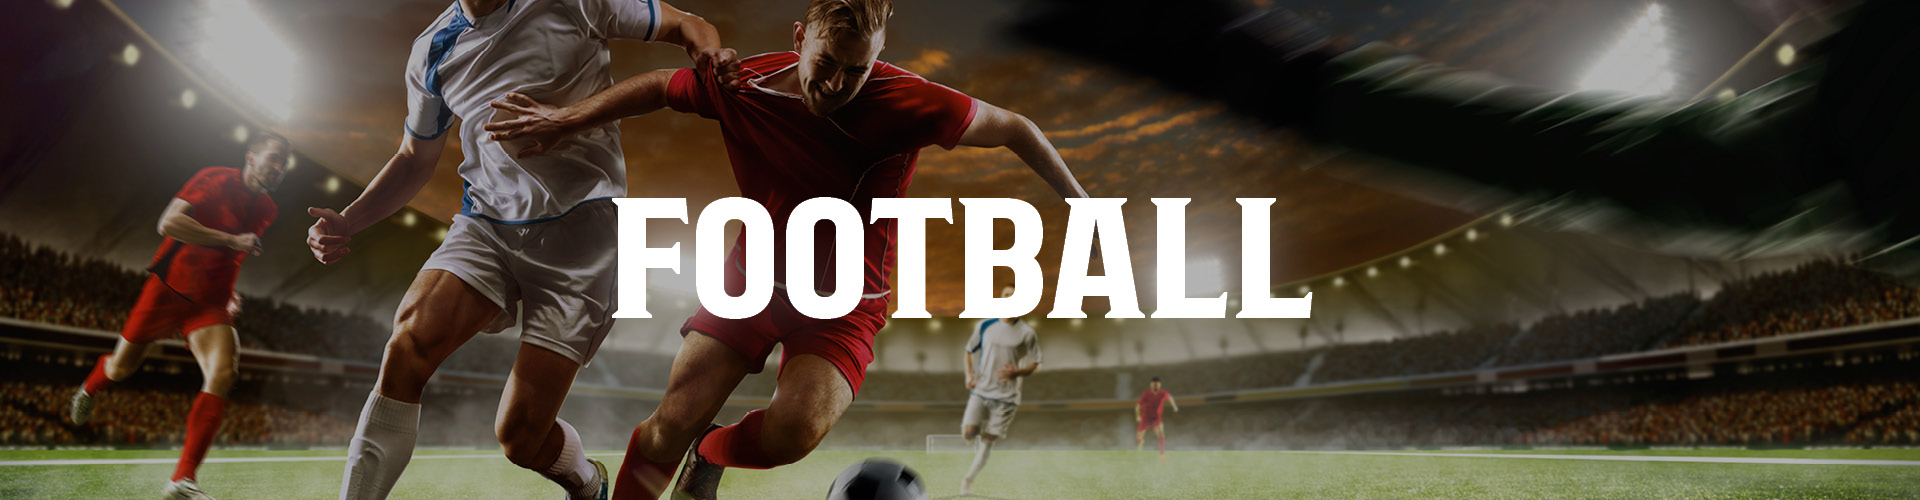 Watch Live Football in Sidcup at George Staples Pub